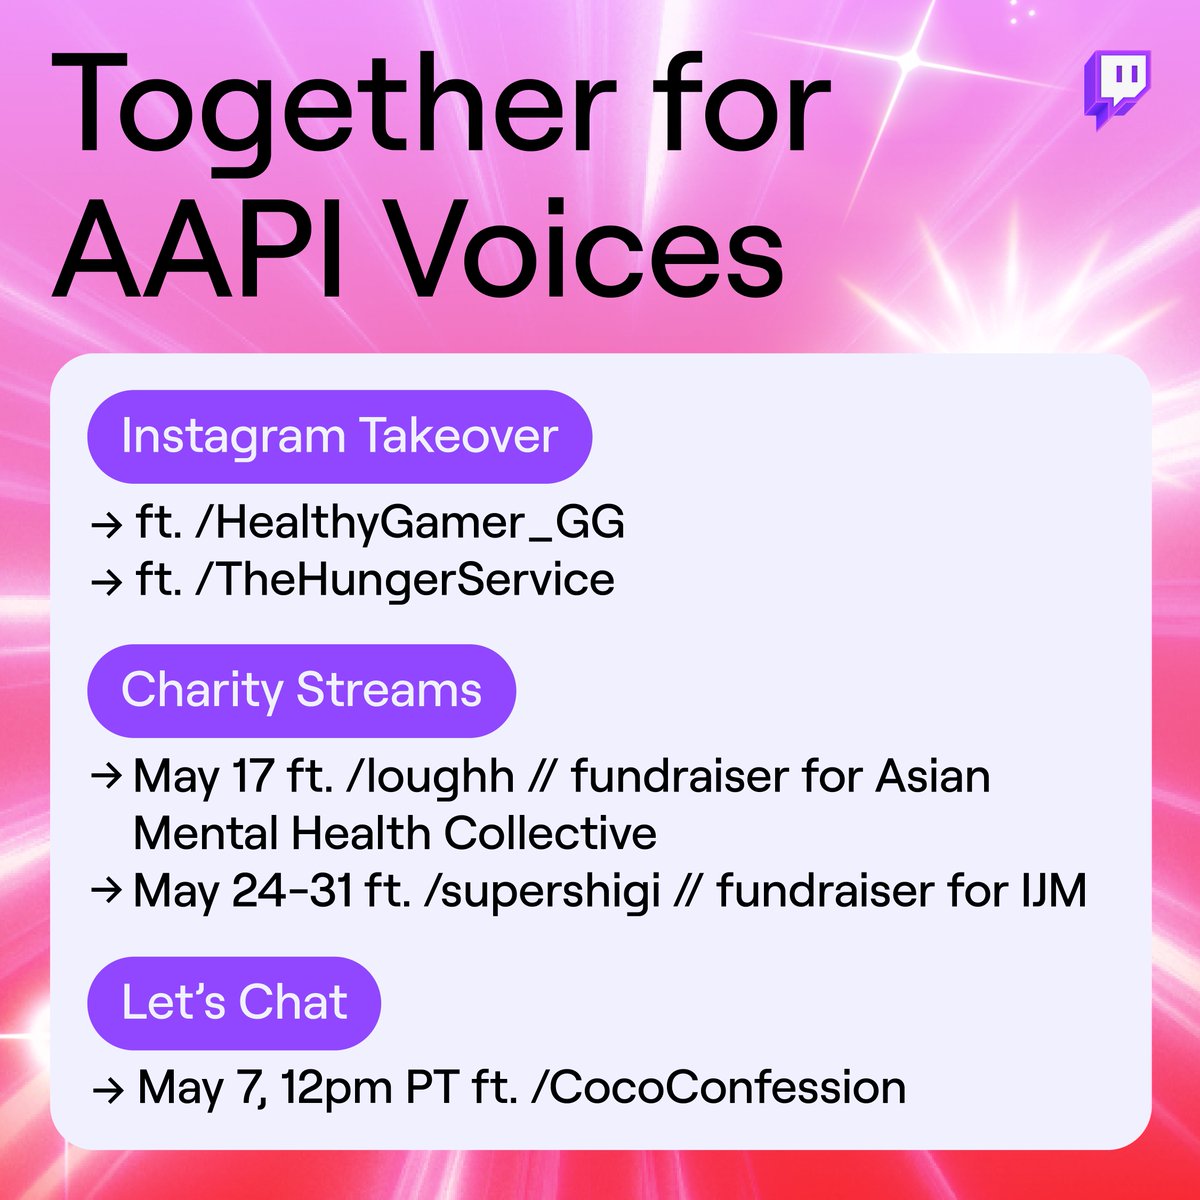 Celebrate #AAPIHeritageMonth with AAPI streamer features on the Twitch homepage! Check out these events and so much more as streamers share their unique stories and distinct voices, while seeing how they build community every day. AAPI streamers bring us all together.